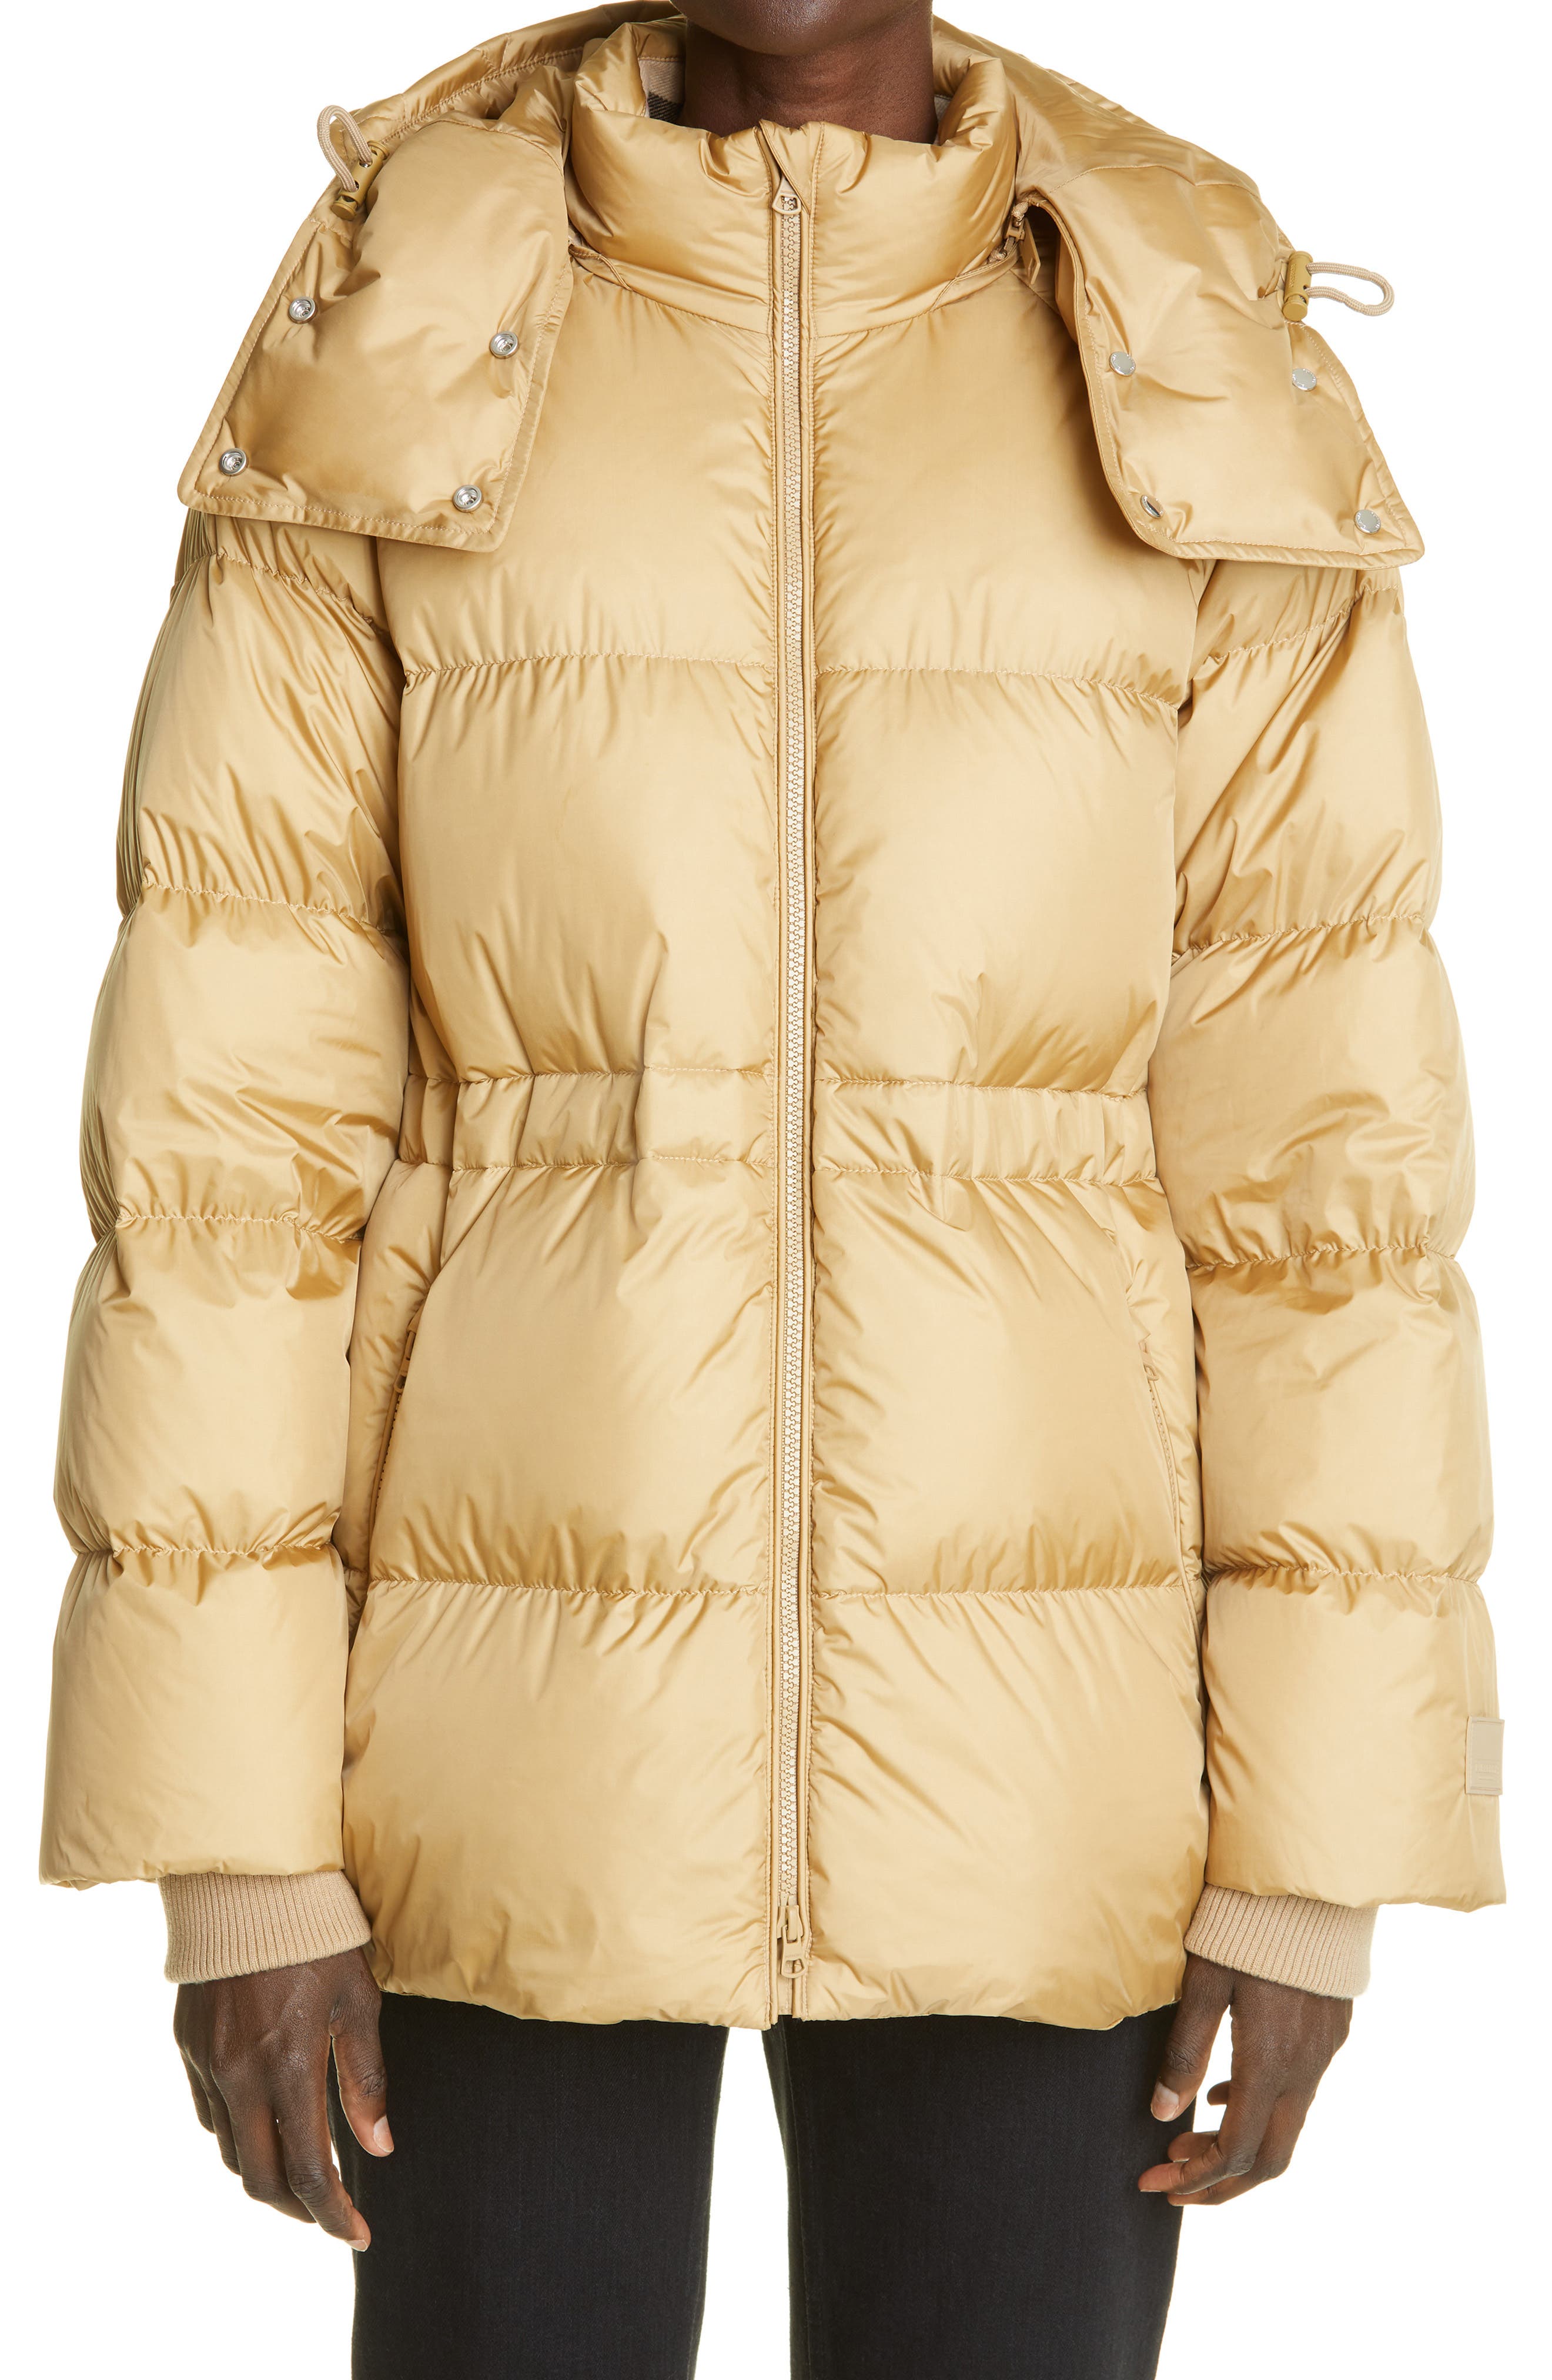 Burberry Broadwas Down Puffer Jacket with Removable Hood in Tan at Nordstrom, Size Medium